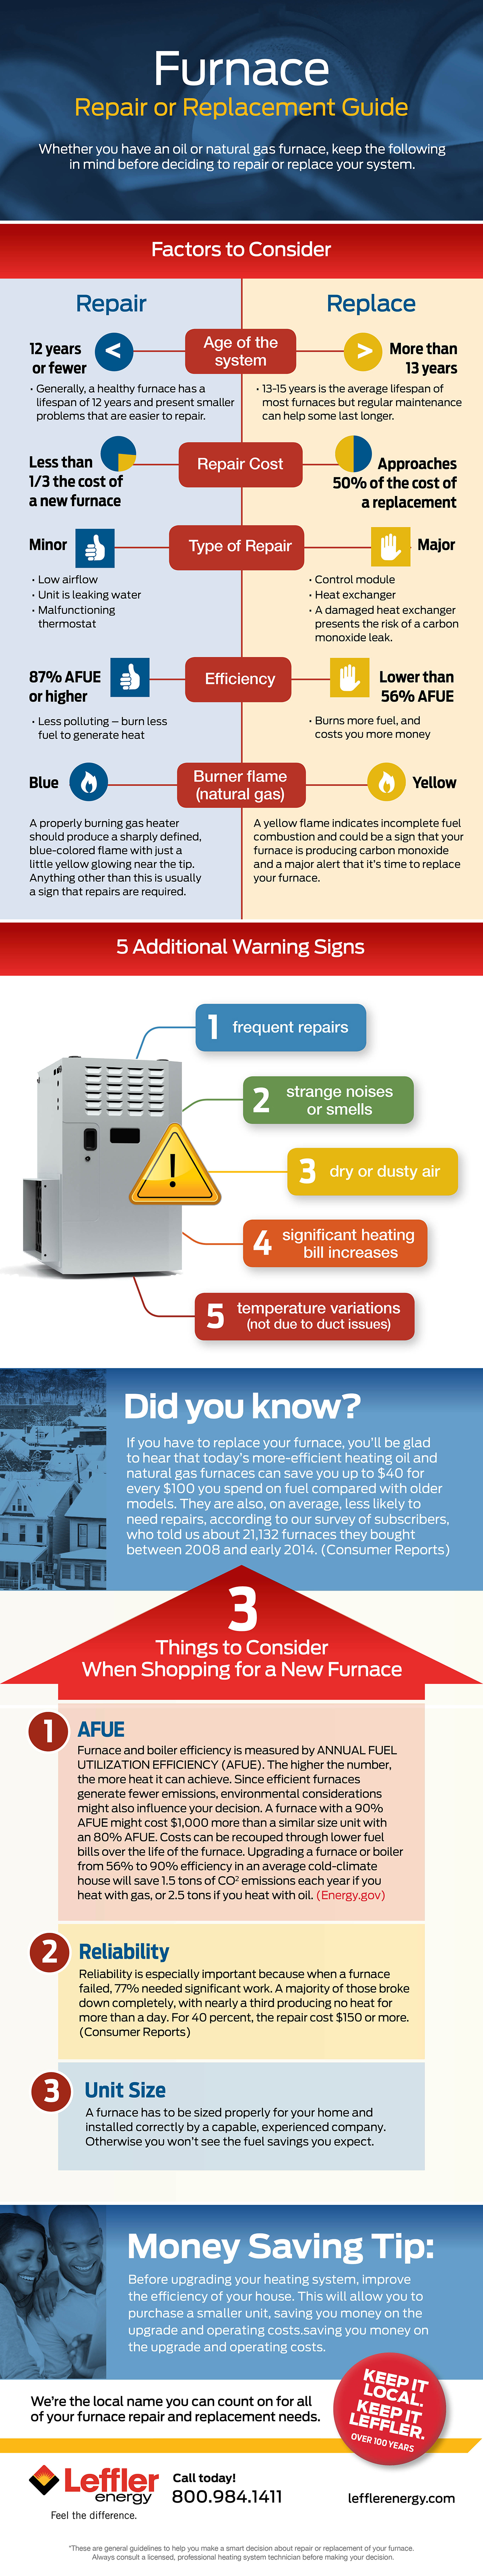 Furnace repair or replace guideline infographic